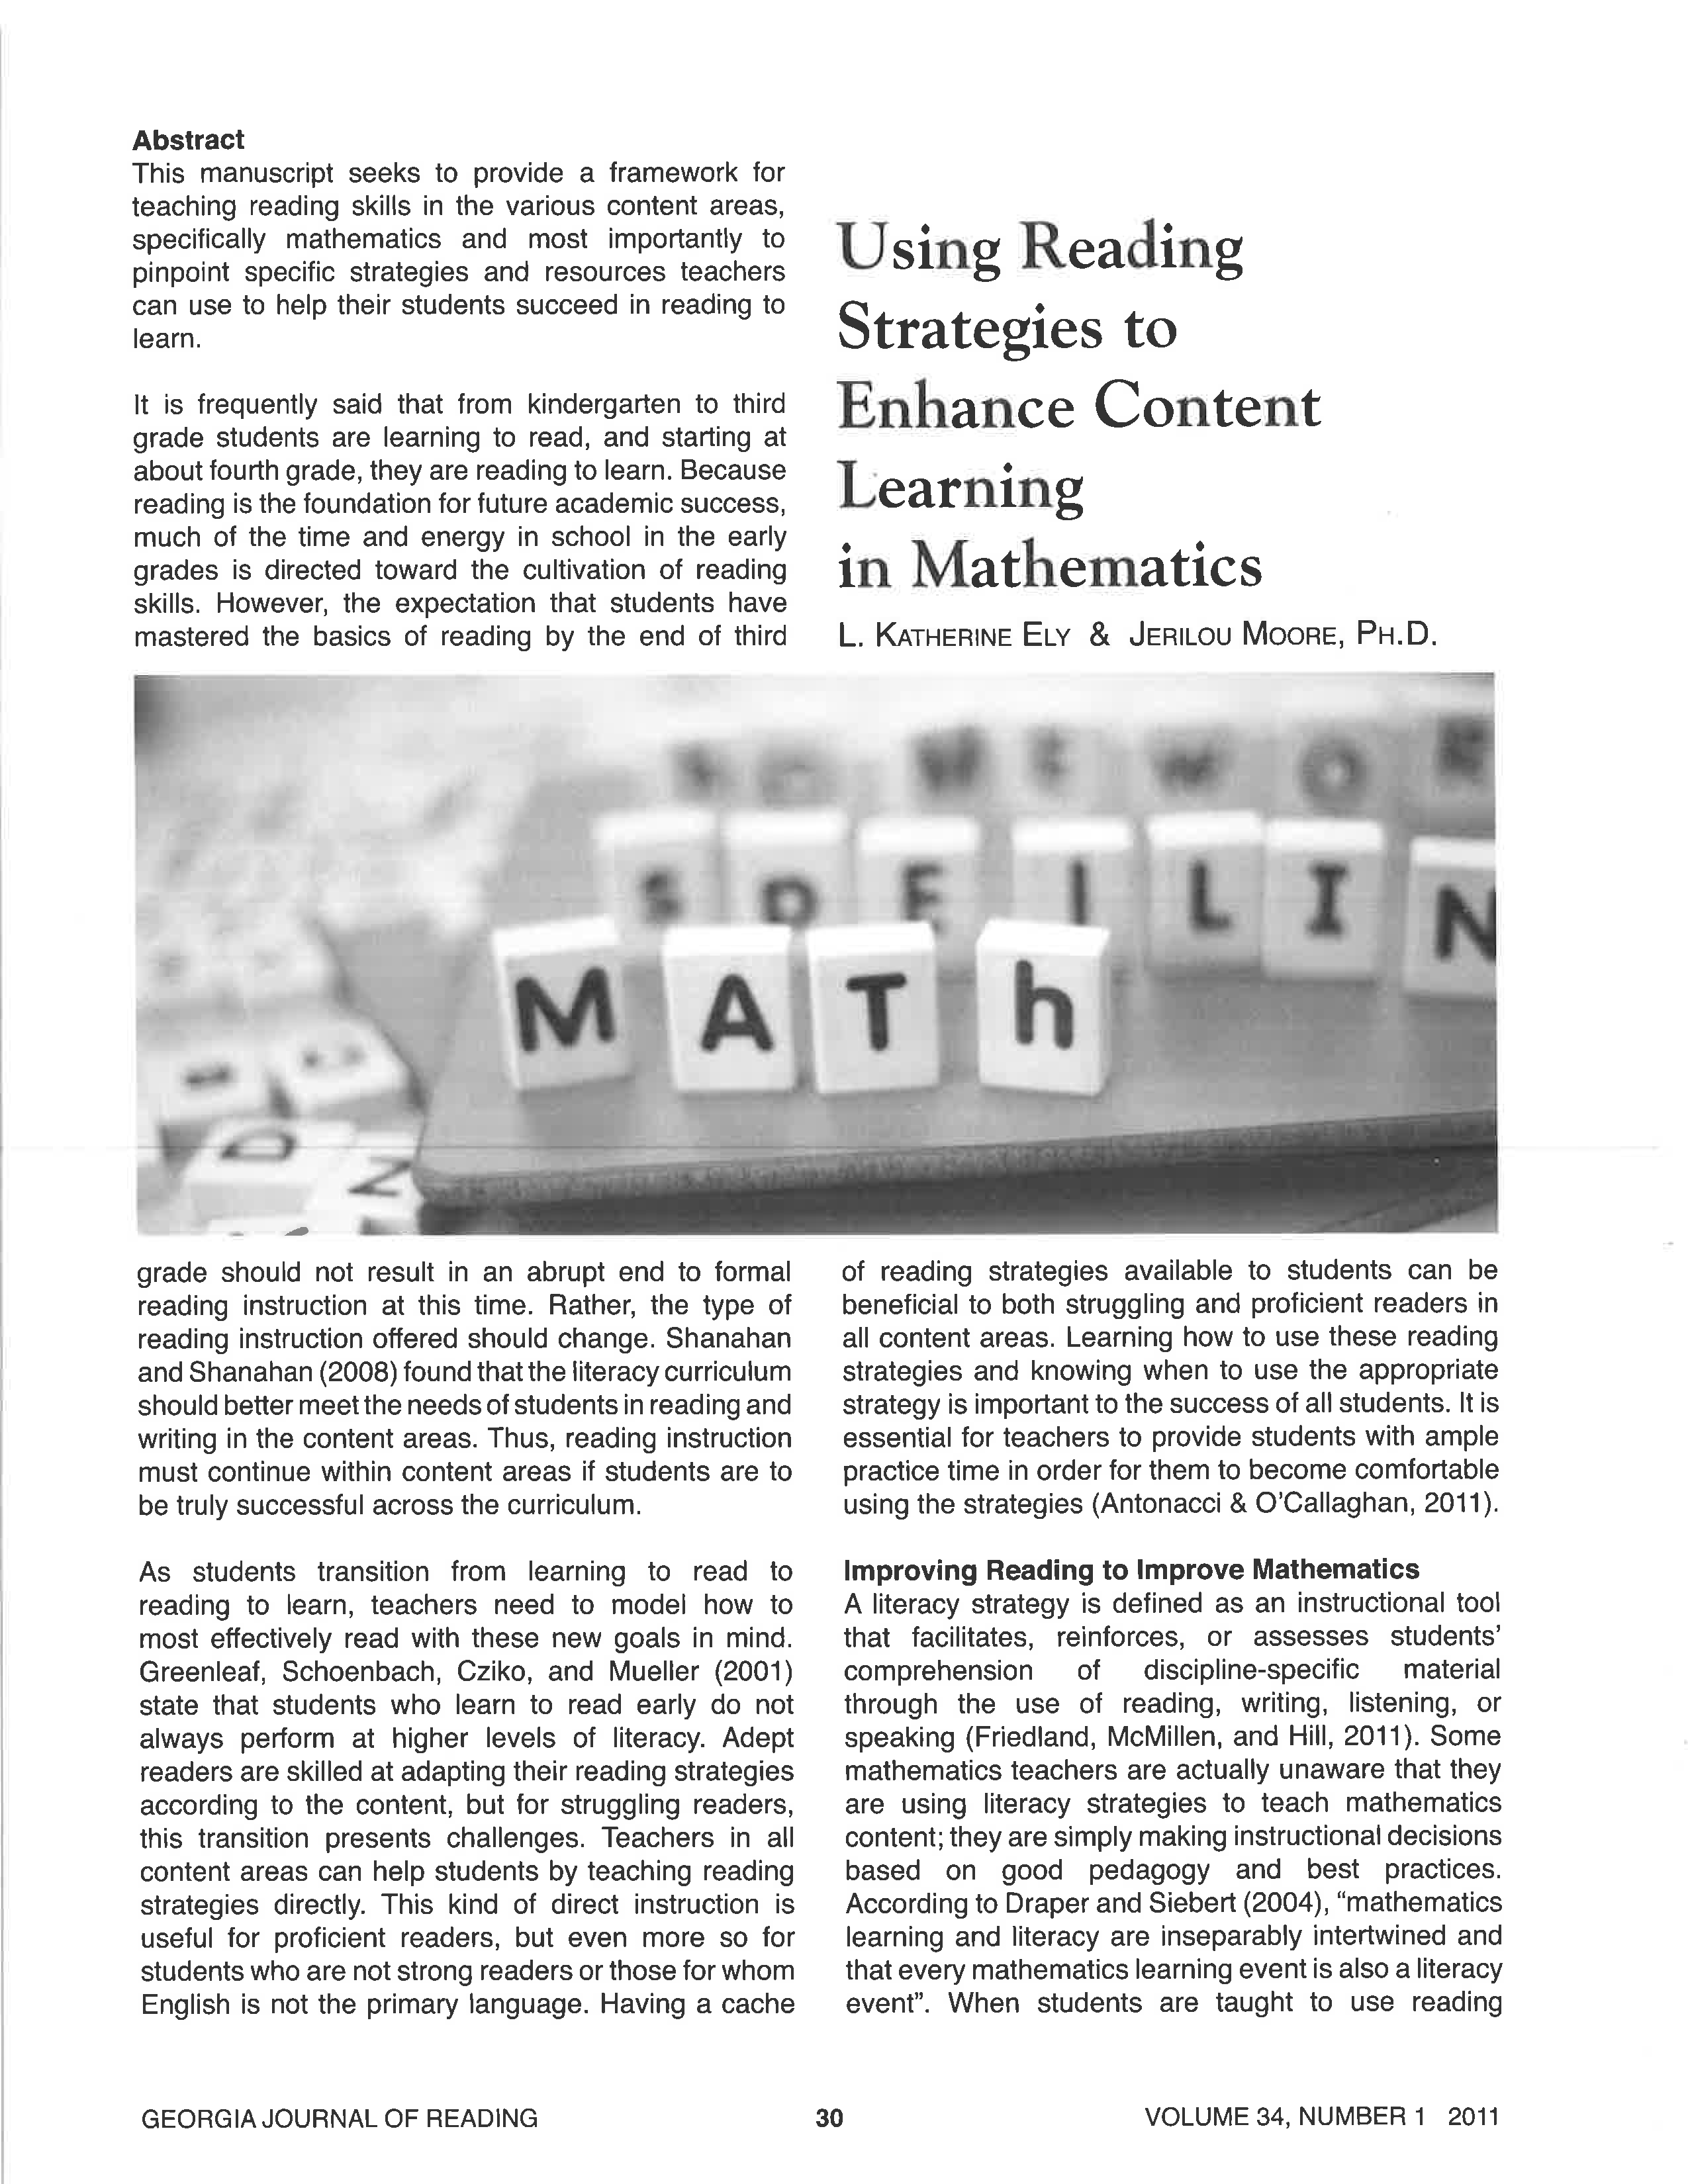 Using Reading Strategies to Enhance Content Learning in Mathematics